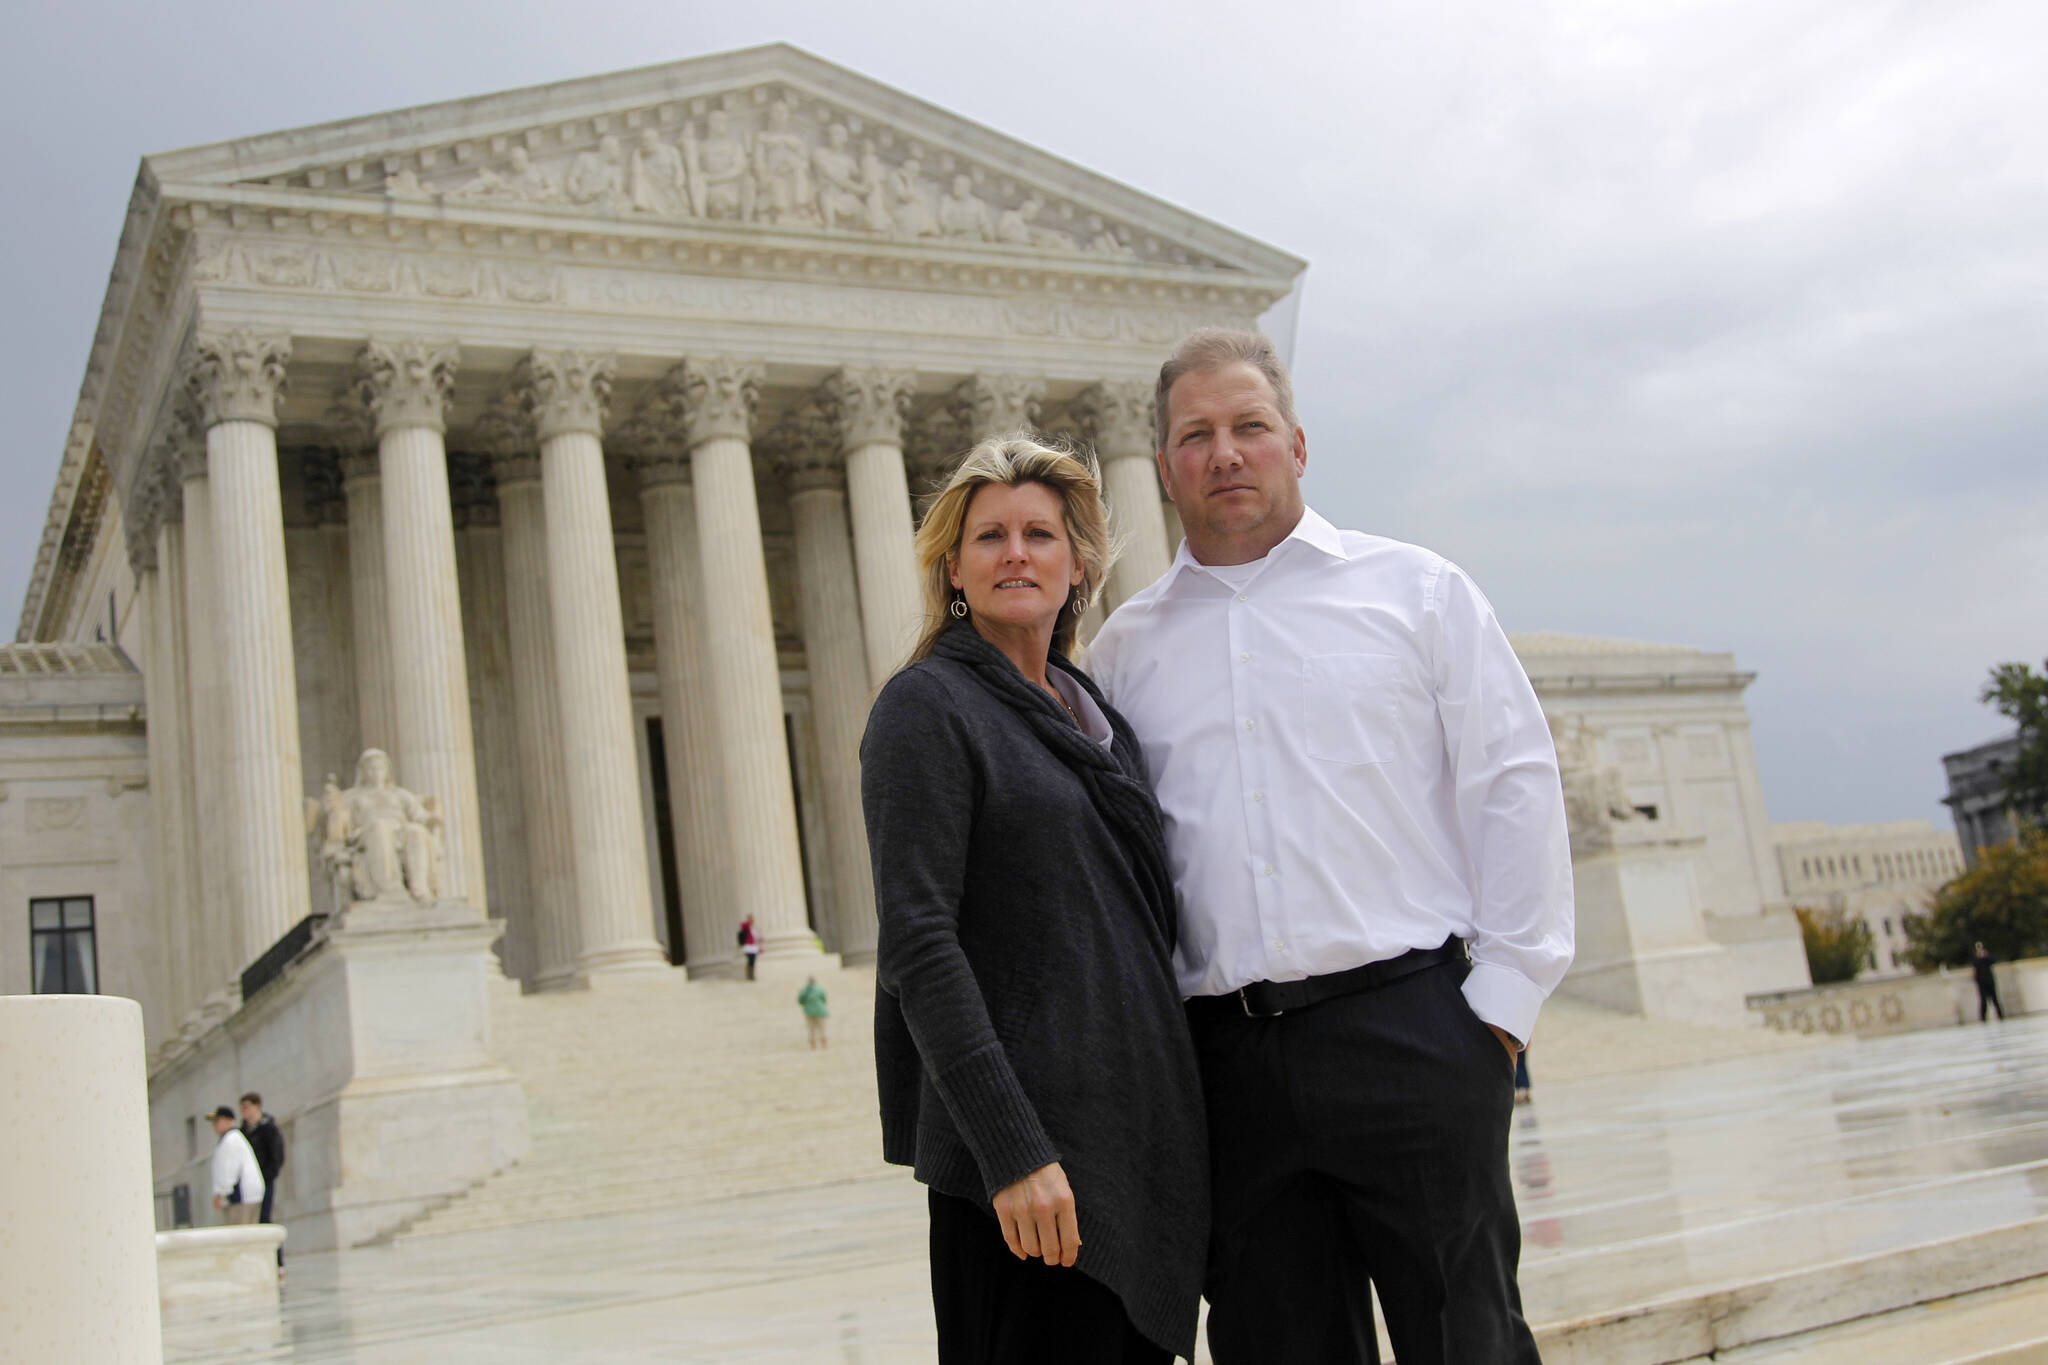 Michael and Chantell Sackett of Priest Lake, Idaho, pose for a photo in front of the Supreme Court in Washington on Oct. 14, 2011. The Supreme Court on Thursday, May 25, 2023, made it harder for the federal government to police water pollution in a decision that strips protections from wetlands that are isolated from larger bodies of water. The justices boosted property rights over concerns about clean water in a ruling in favor of an Idaho couple who sought to build a house near Priest Lake in the state’s panhandle. (AP Photo/Haraz N. Ghanbari, File)